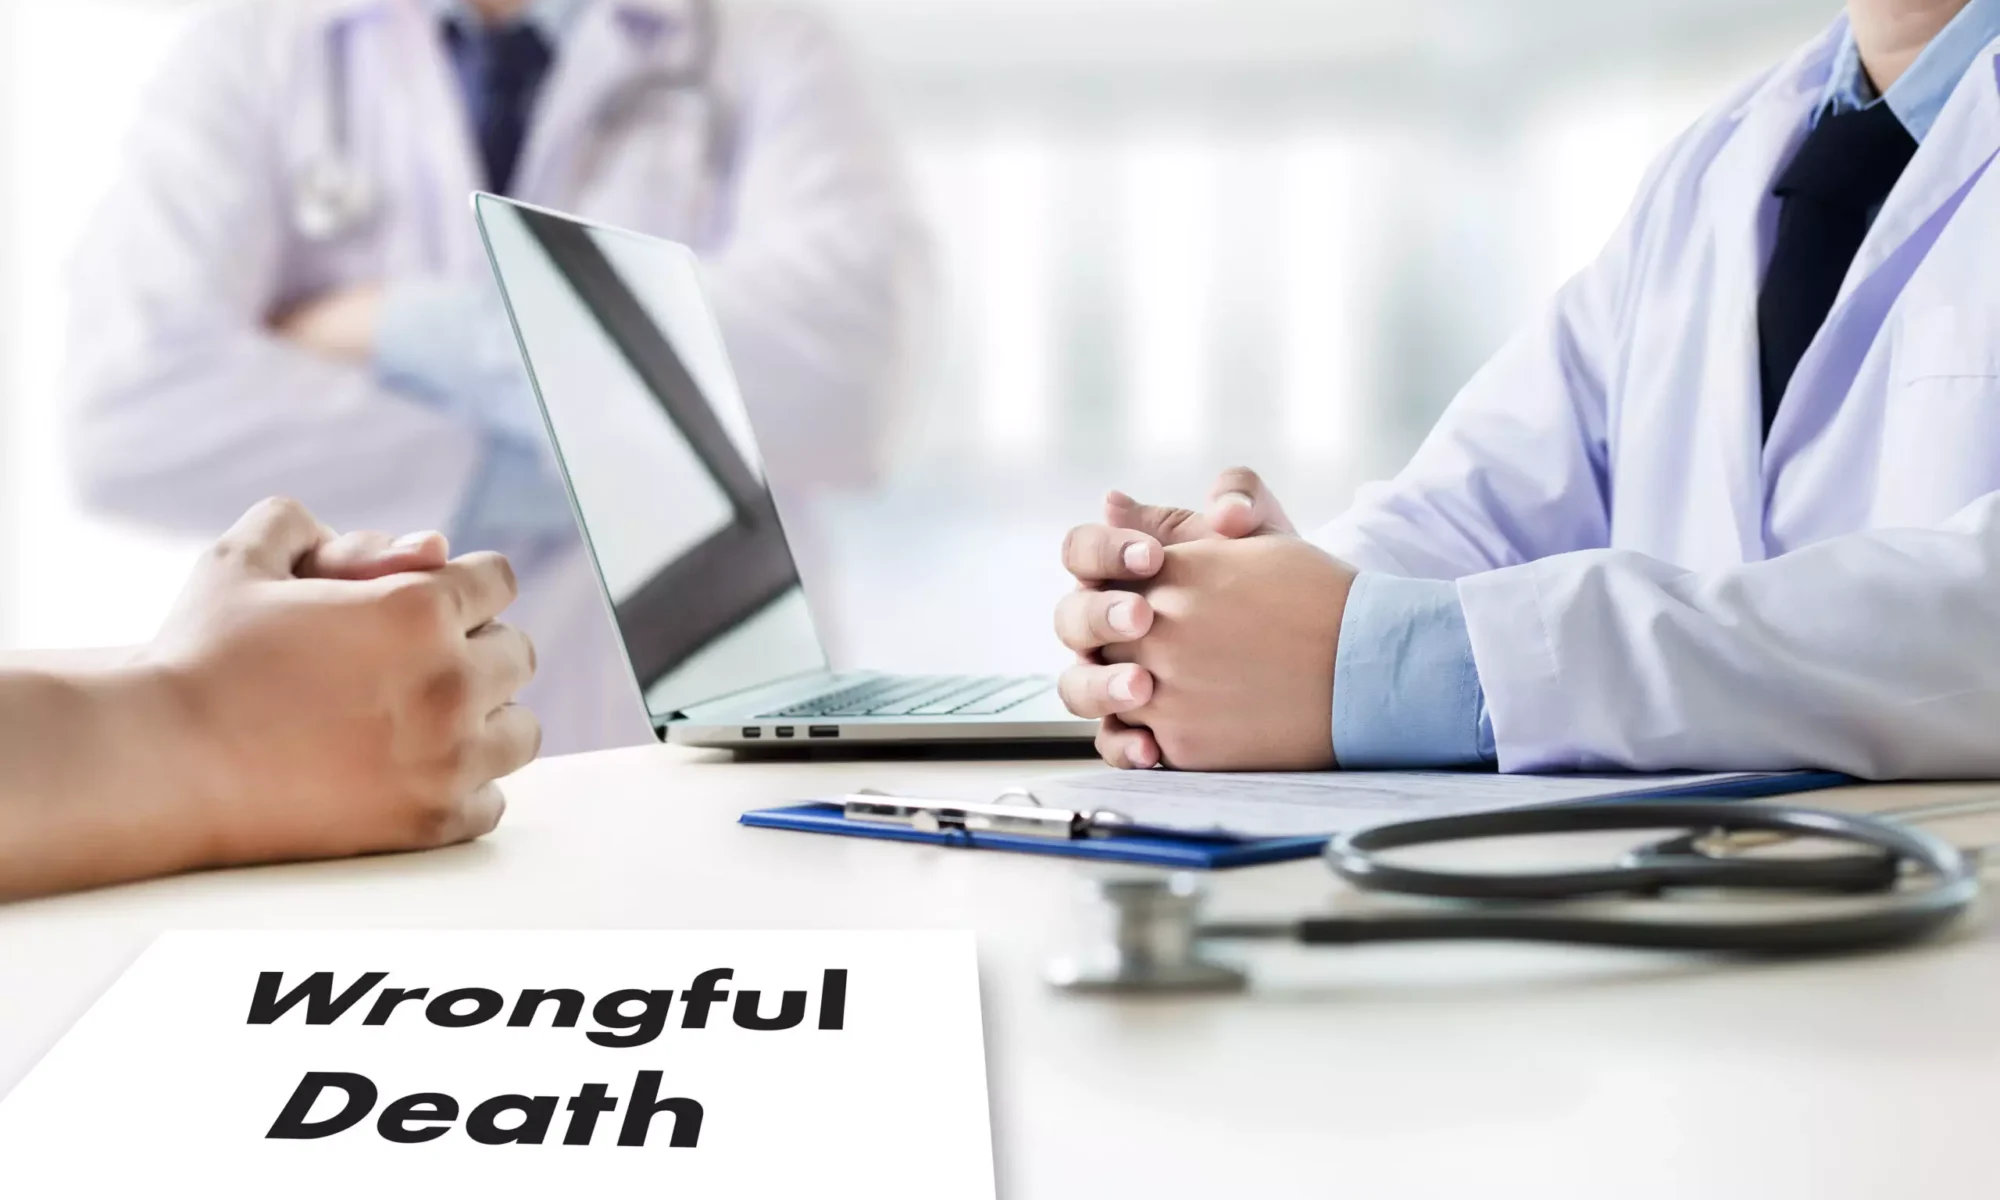 How to Find a Wrongful Death Attorney